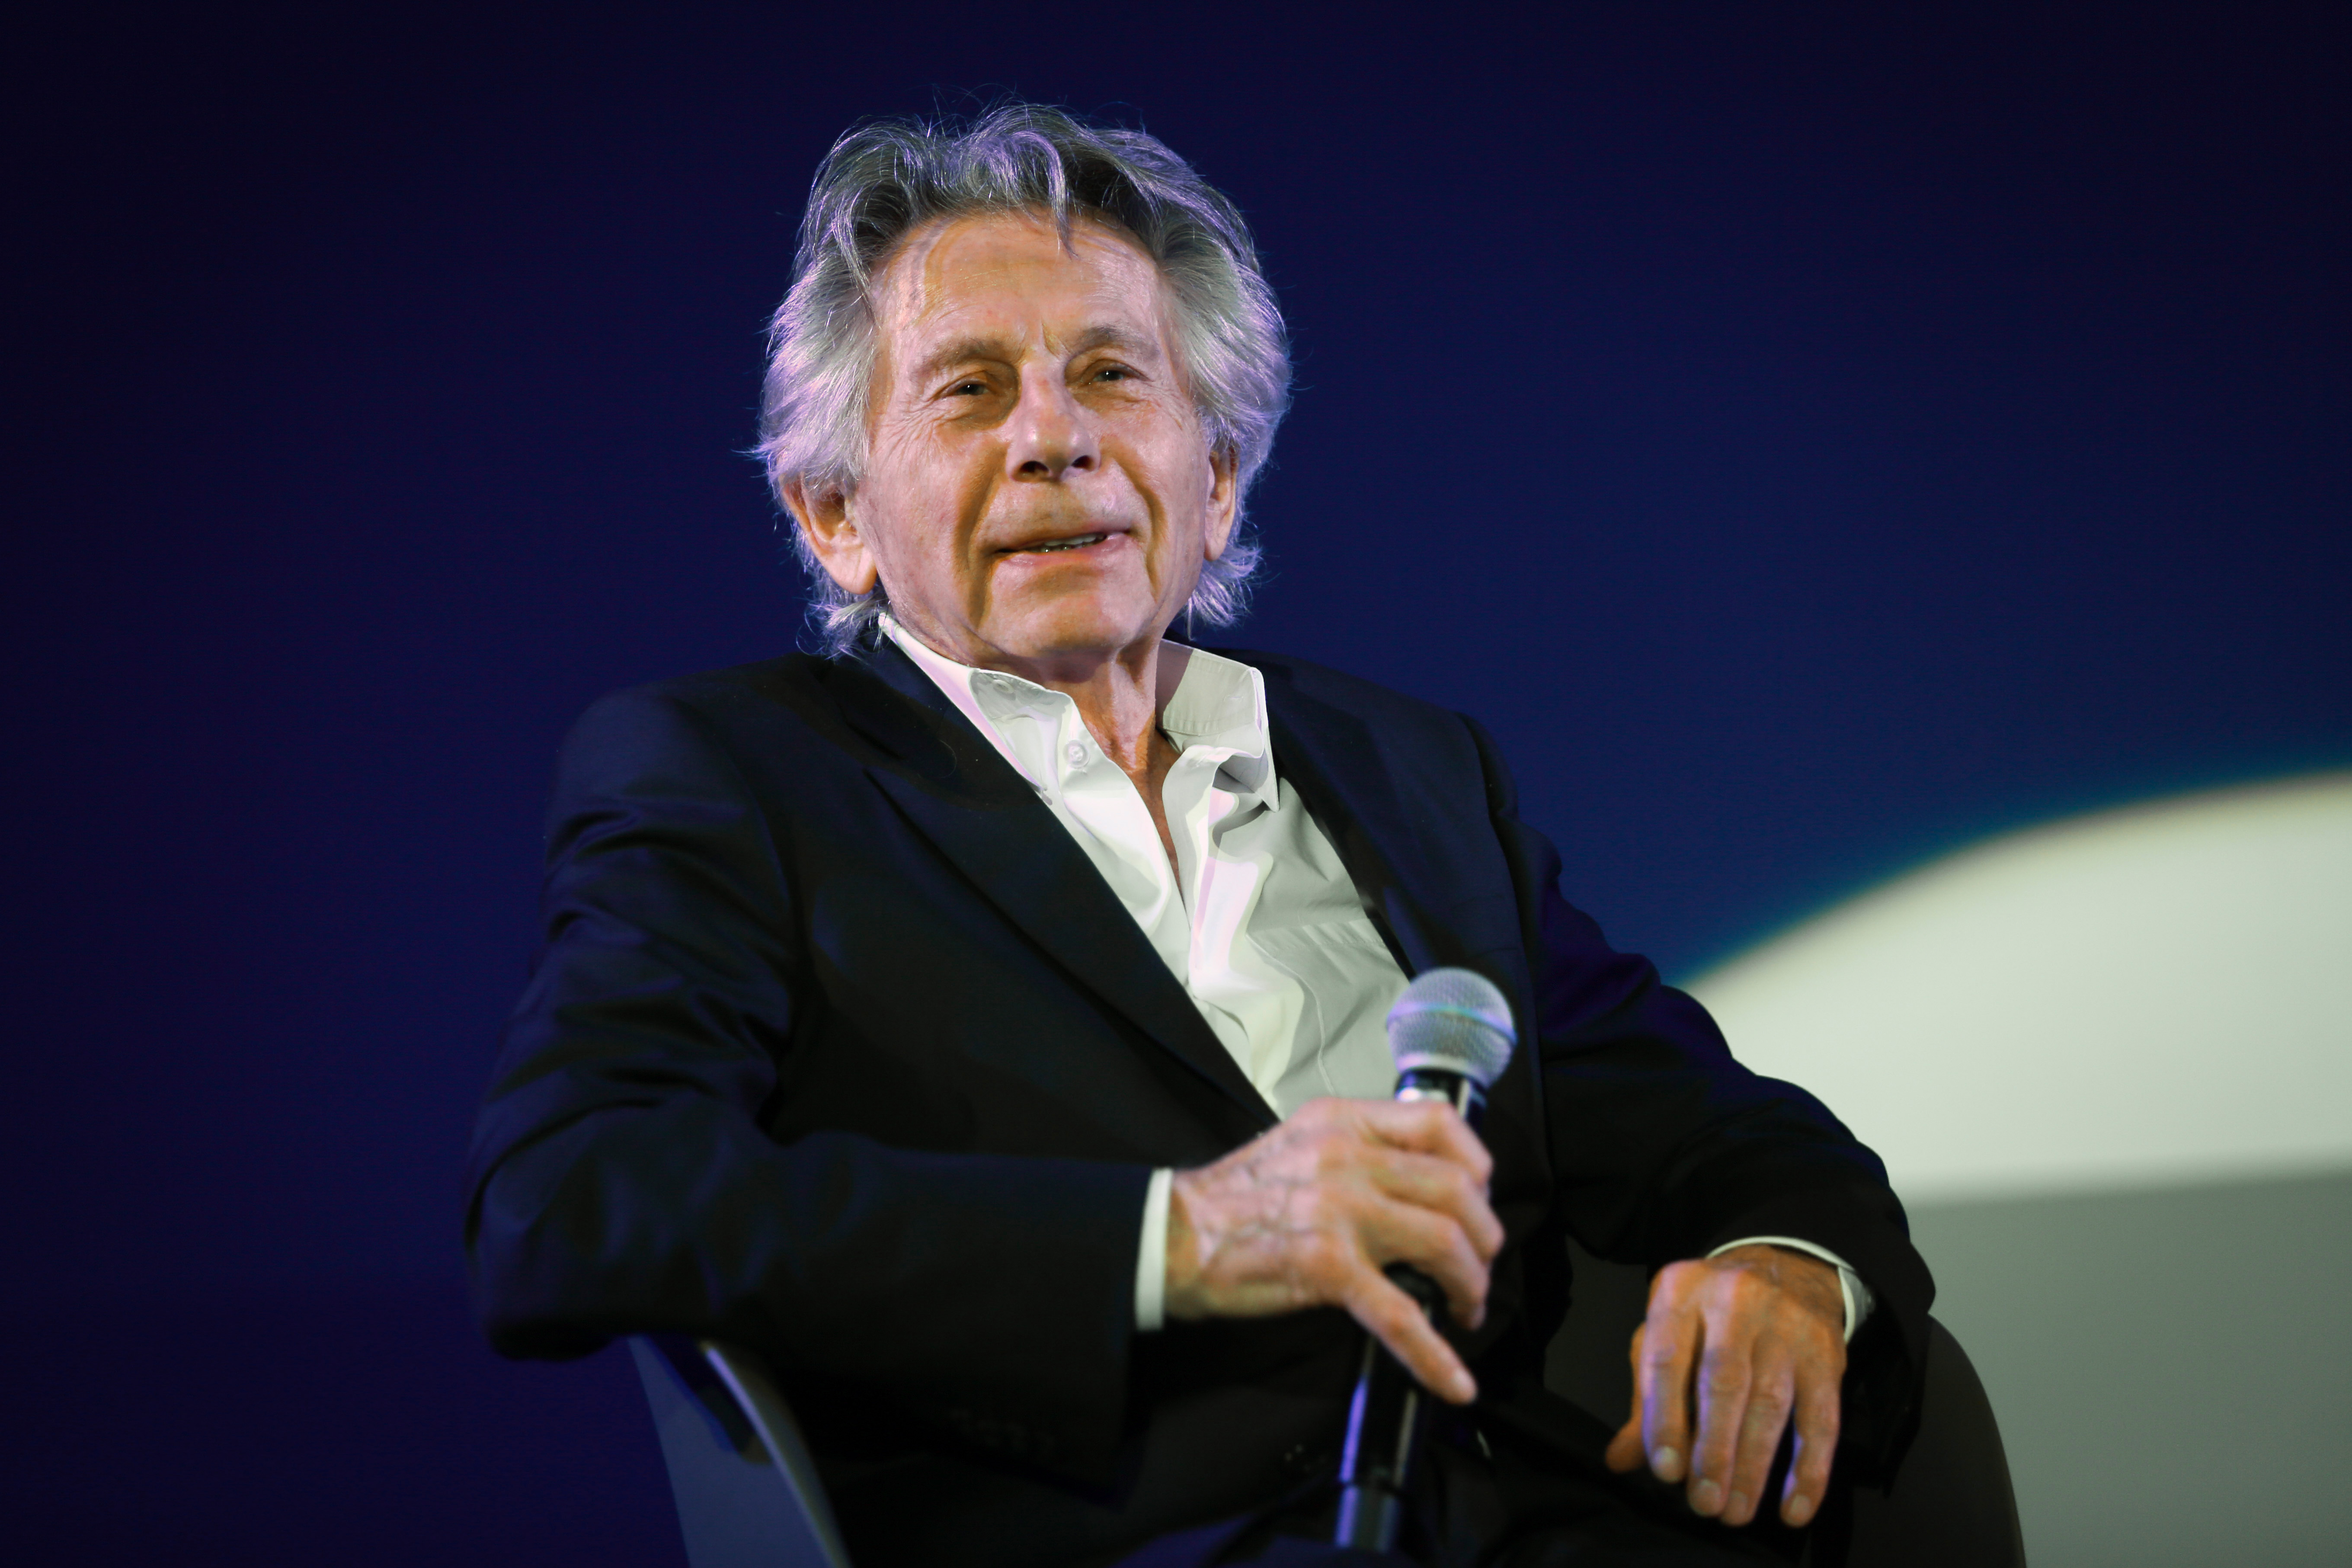 Roman Polanski portrayed during Netia Off Camera film festival on May 2nd, 2018, in Krakow, Poland. | Source: Getty Images